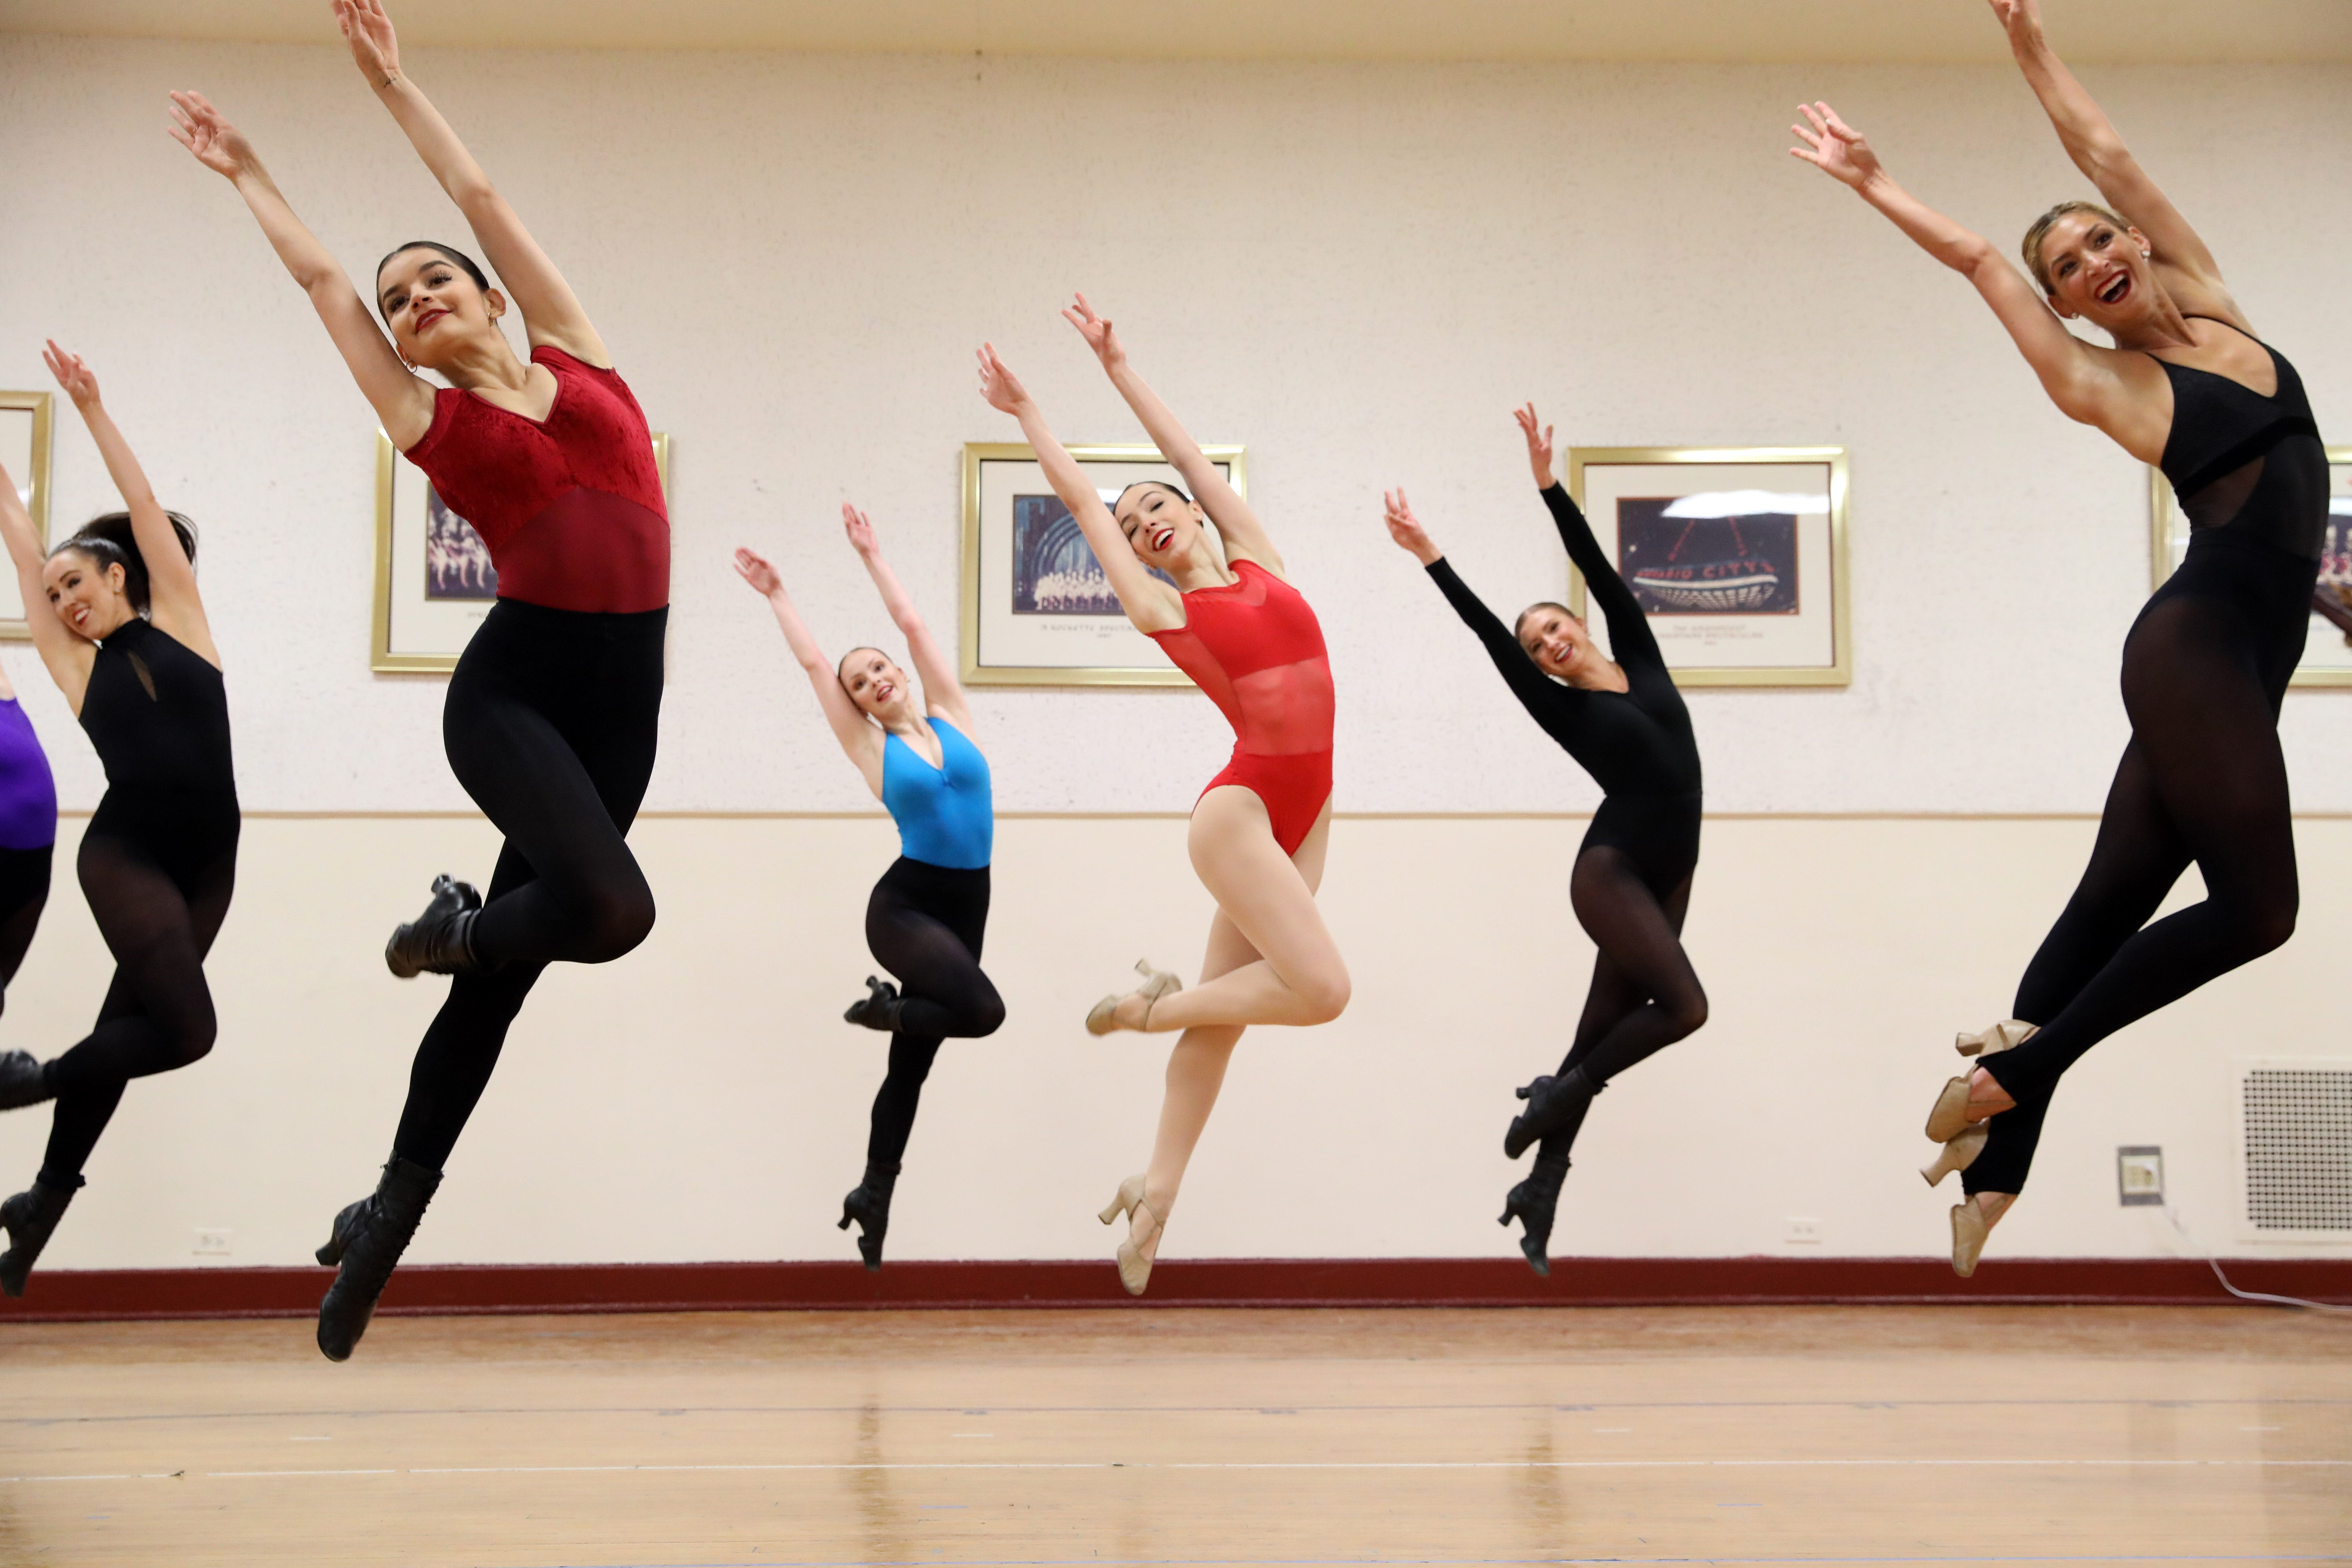 “Make a crescent shape,” the dancers are told on Day 3 of the open-call audition. And they do, mid-leap.